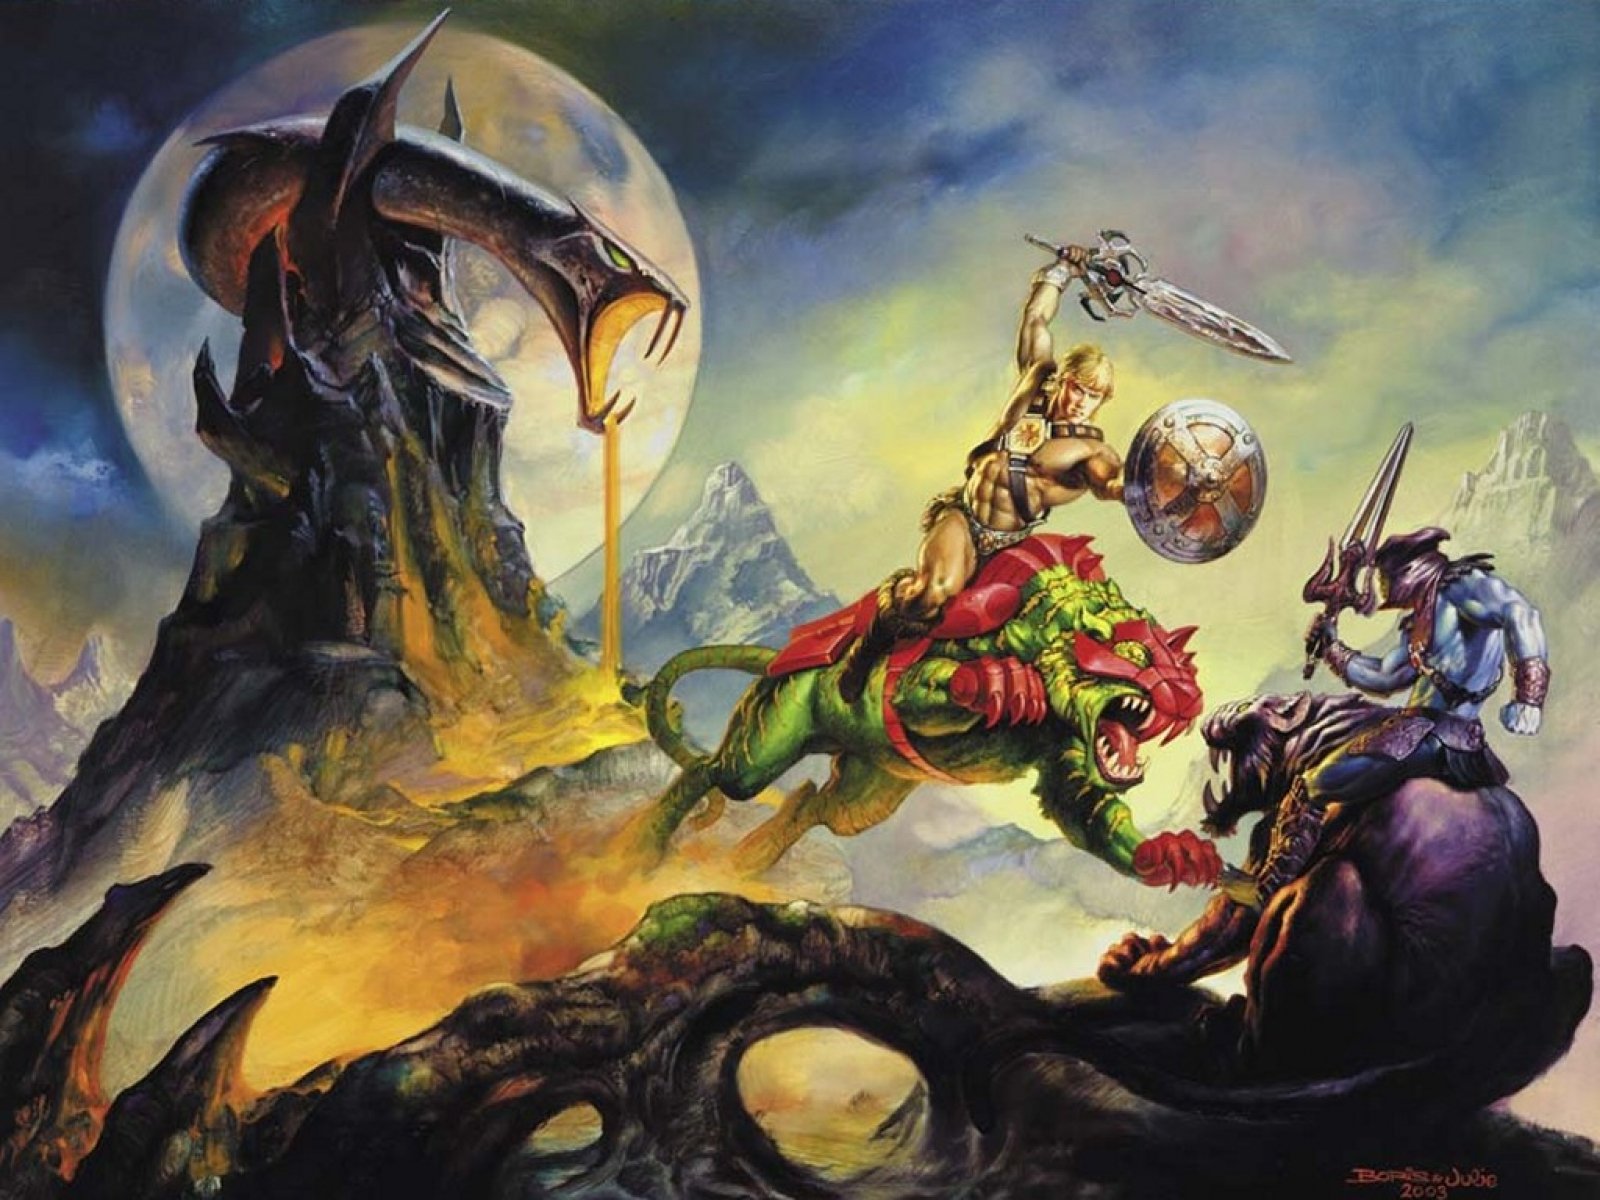 He Man wallpapers for desktop, download free He Man pictures and  backgrounds for PC | mob.org